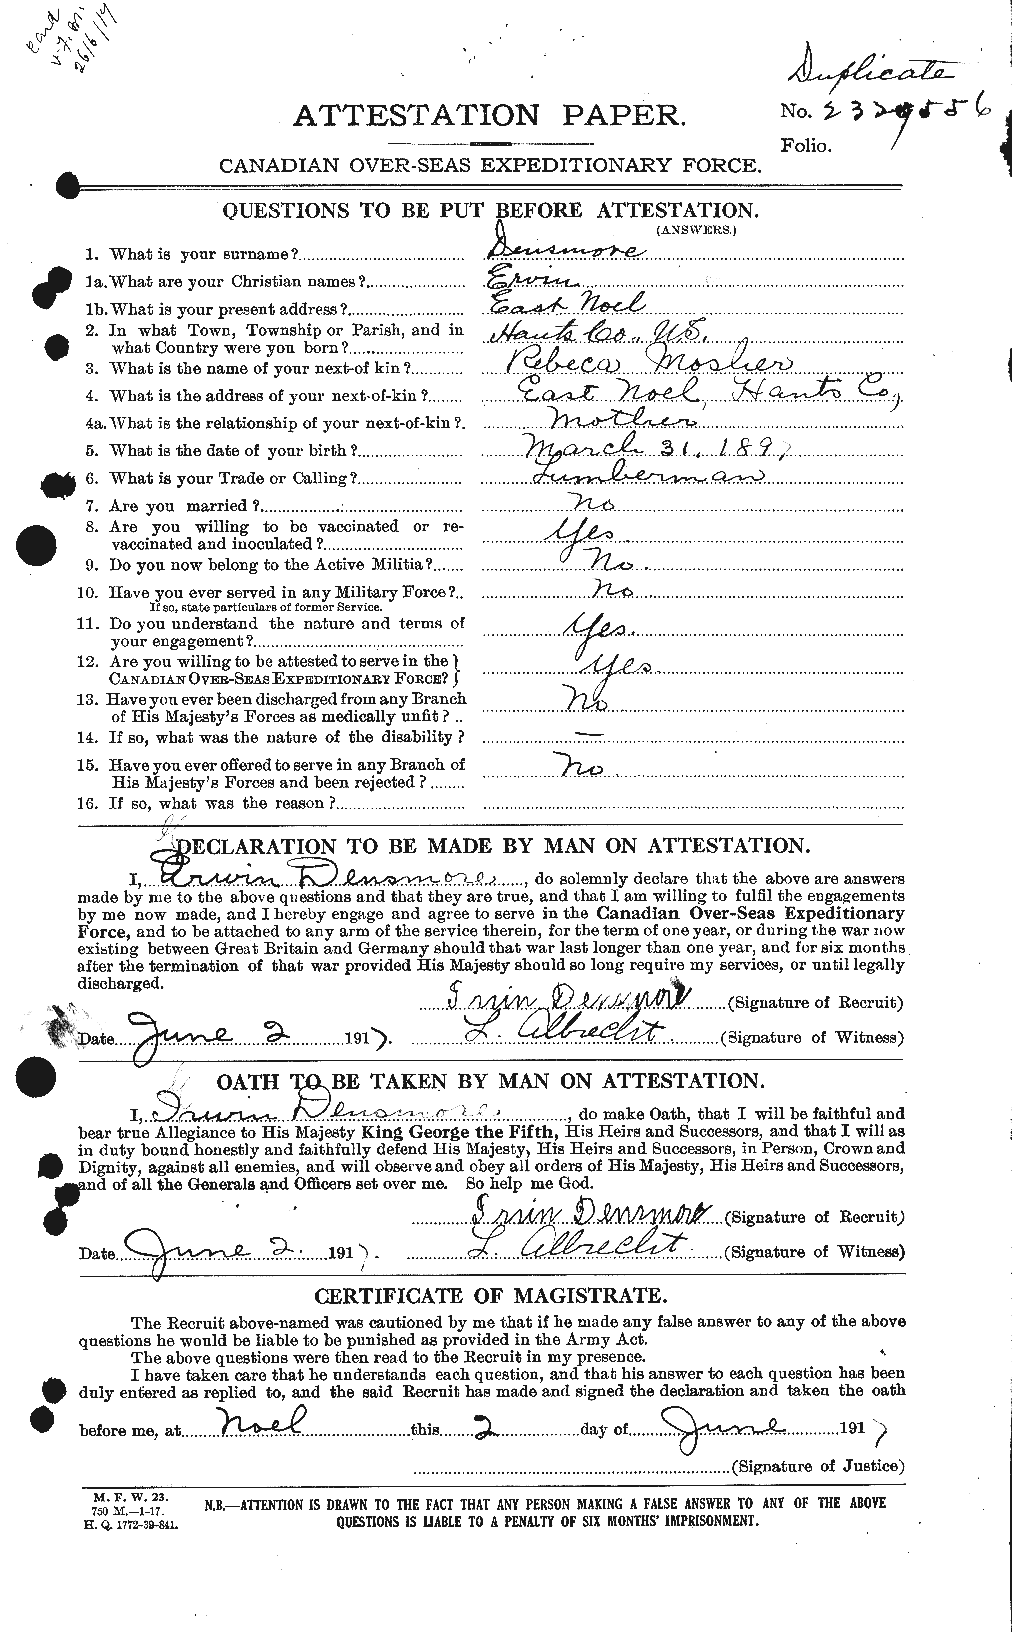 Personnel Records of the First World War - CEF 286424a